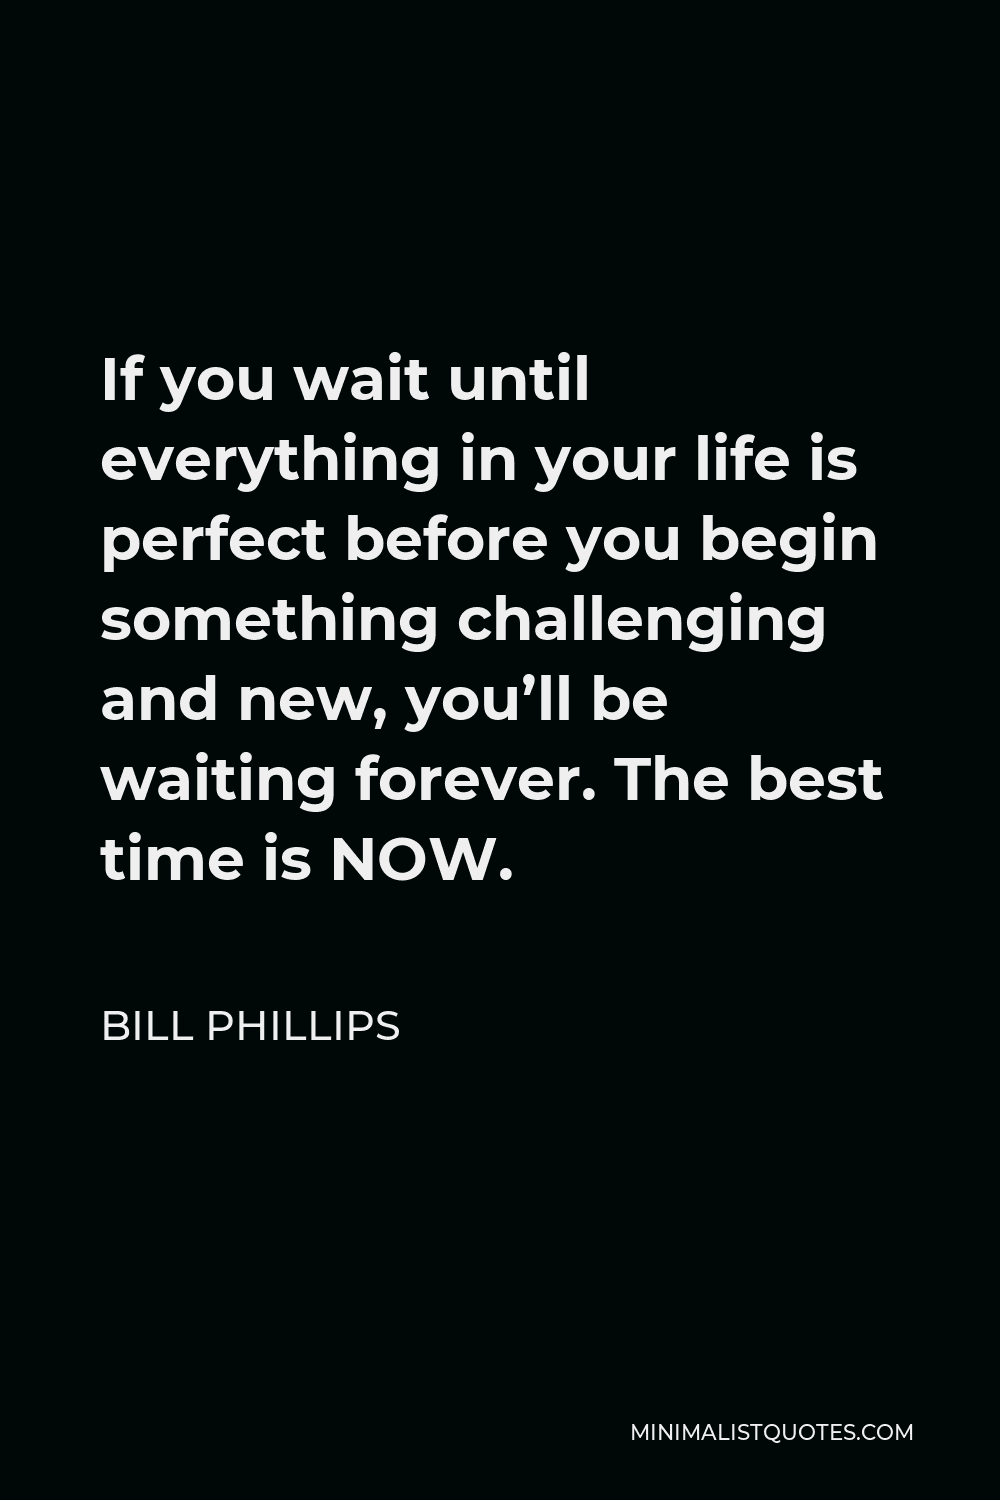 Bill Phillips Quote - If you wait until everything in your life is perfect before you begin something challenging and new, you’ll be waiting forever. The best time is NOW.